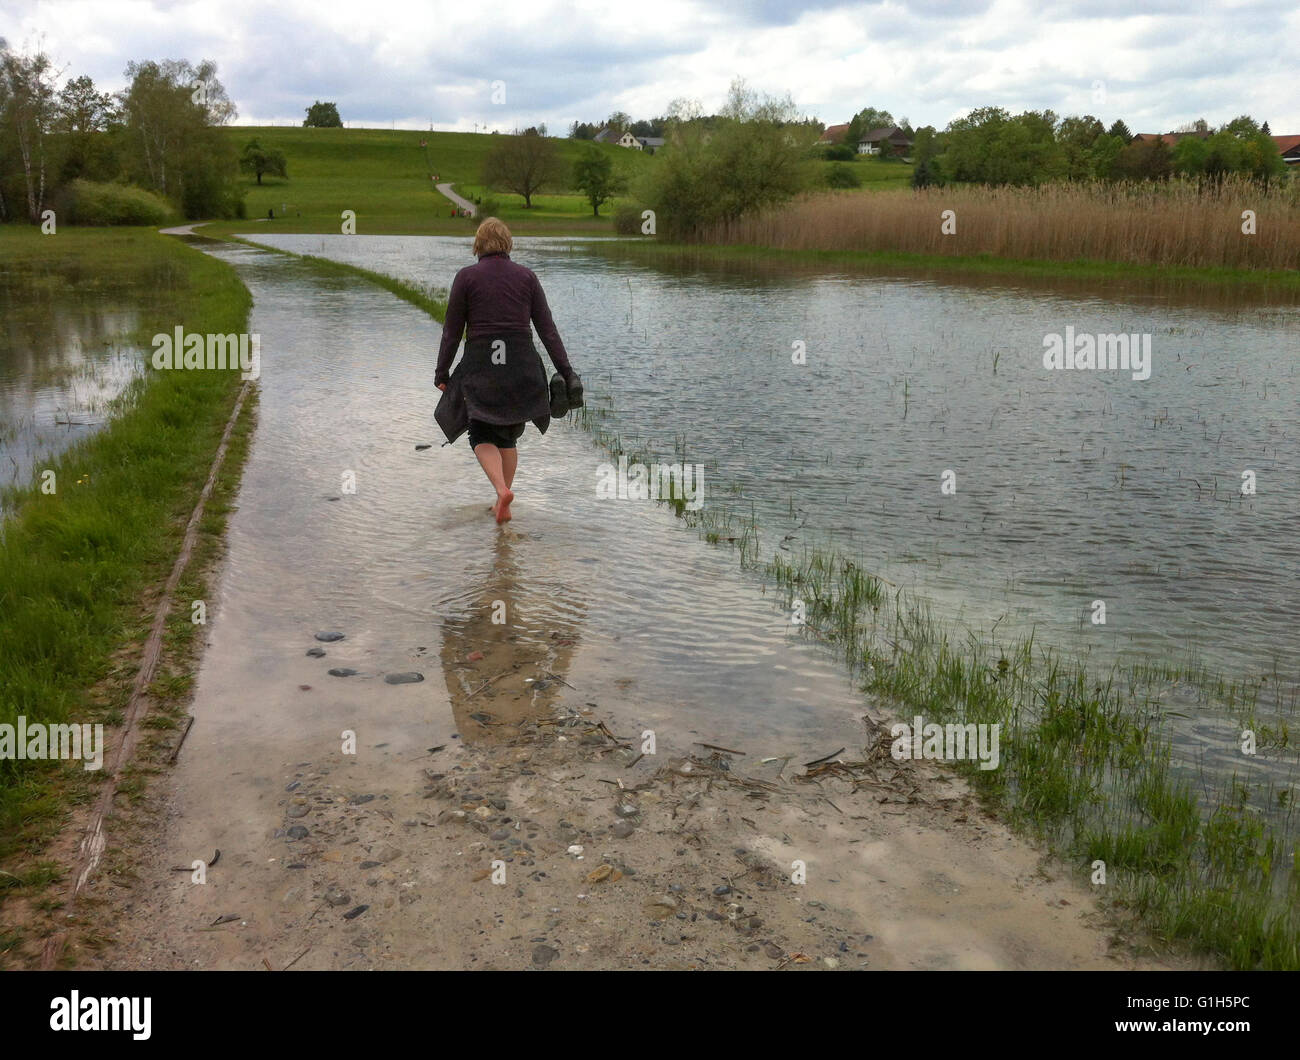 Pfaeffikon/Zurich, Switzerland - May 15, 2016: A woman has taken off her shoes and wades through the water that had overflooded a lakeside hiking trail at Lake Pfaeffikon, Switzerland (canton Zurich). After heavy rainfalls, many rivers and lakes in Switzerland burst their banks. Credit:  Erik Tham/Alamy Live News Stock Photo